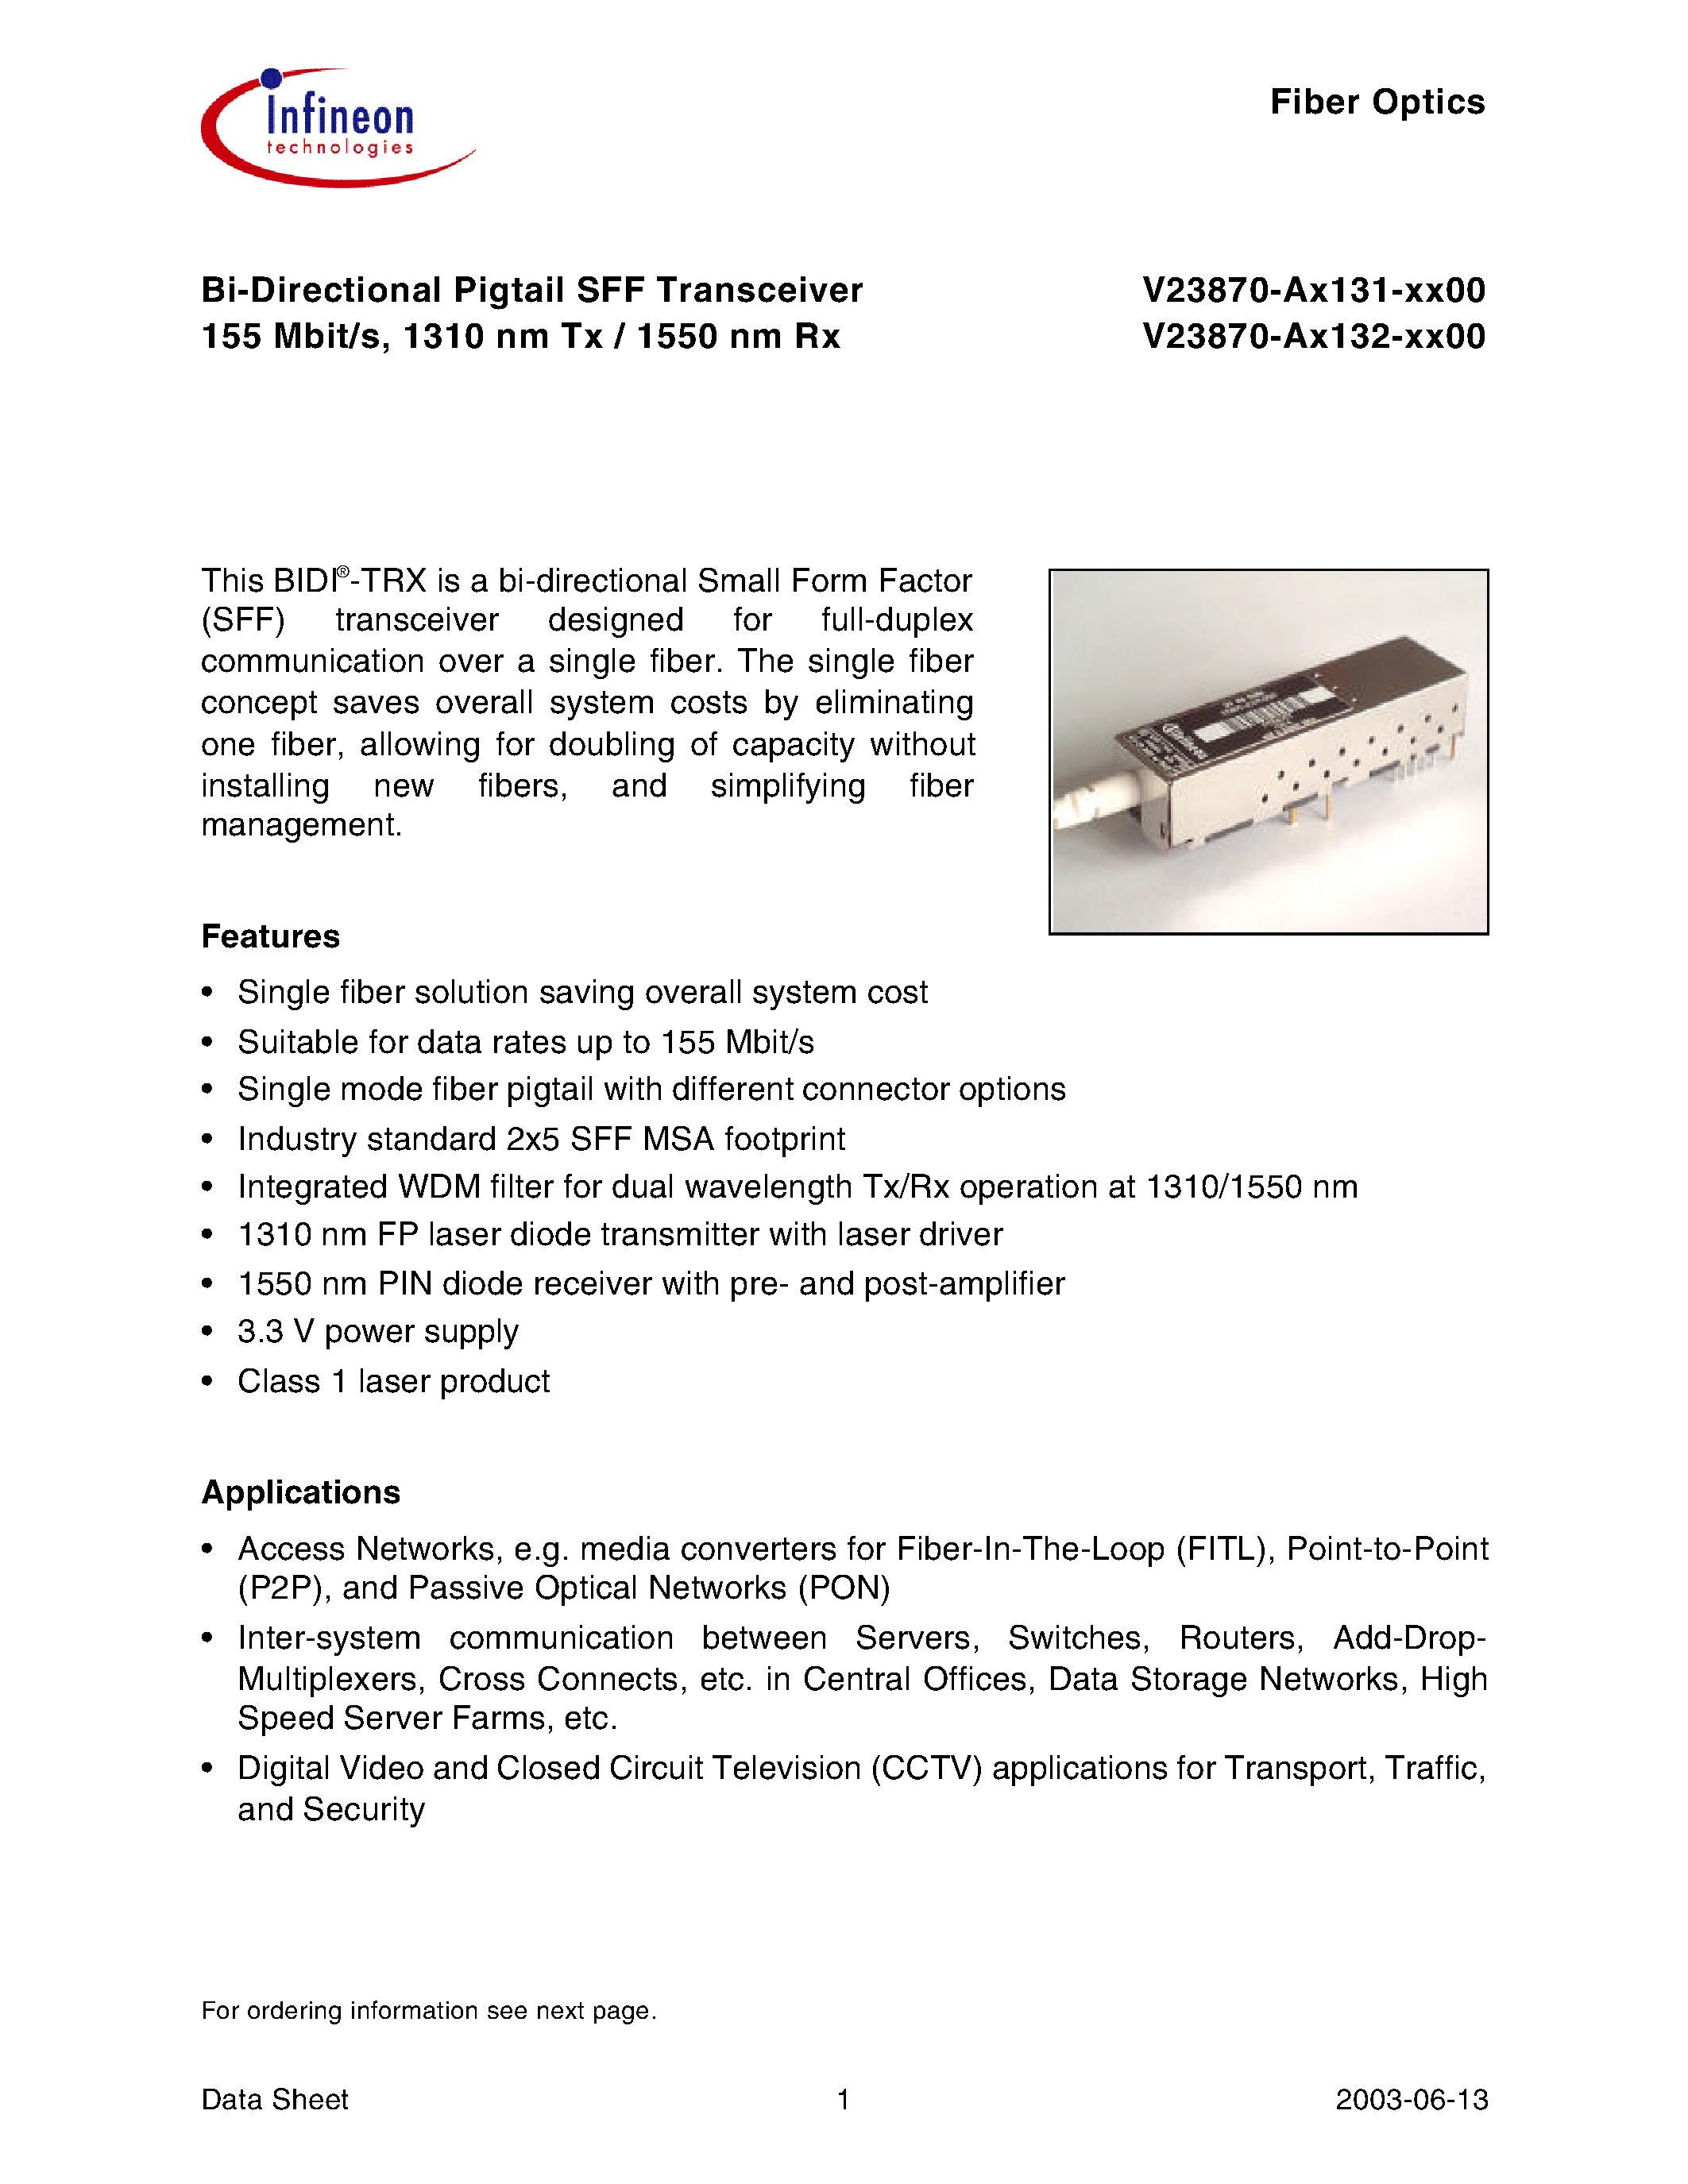 Datasheet V23870-A3131-F100 - Bi-Directional Pigtail SFF Transceiver 155 Mbit/s/ 1310 nm Tx / 1550 nm Rx page 1